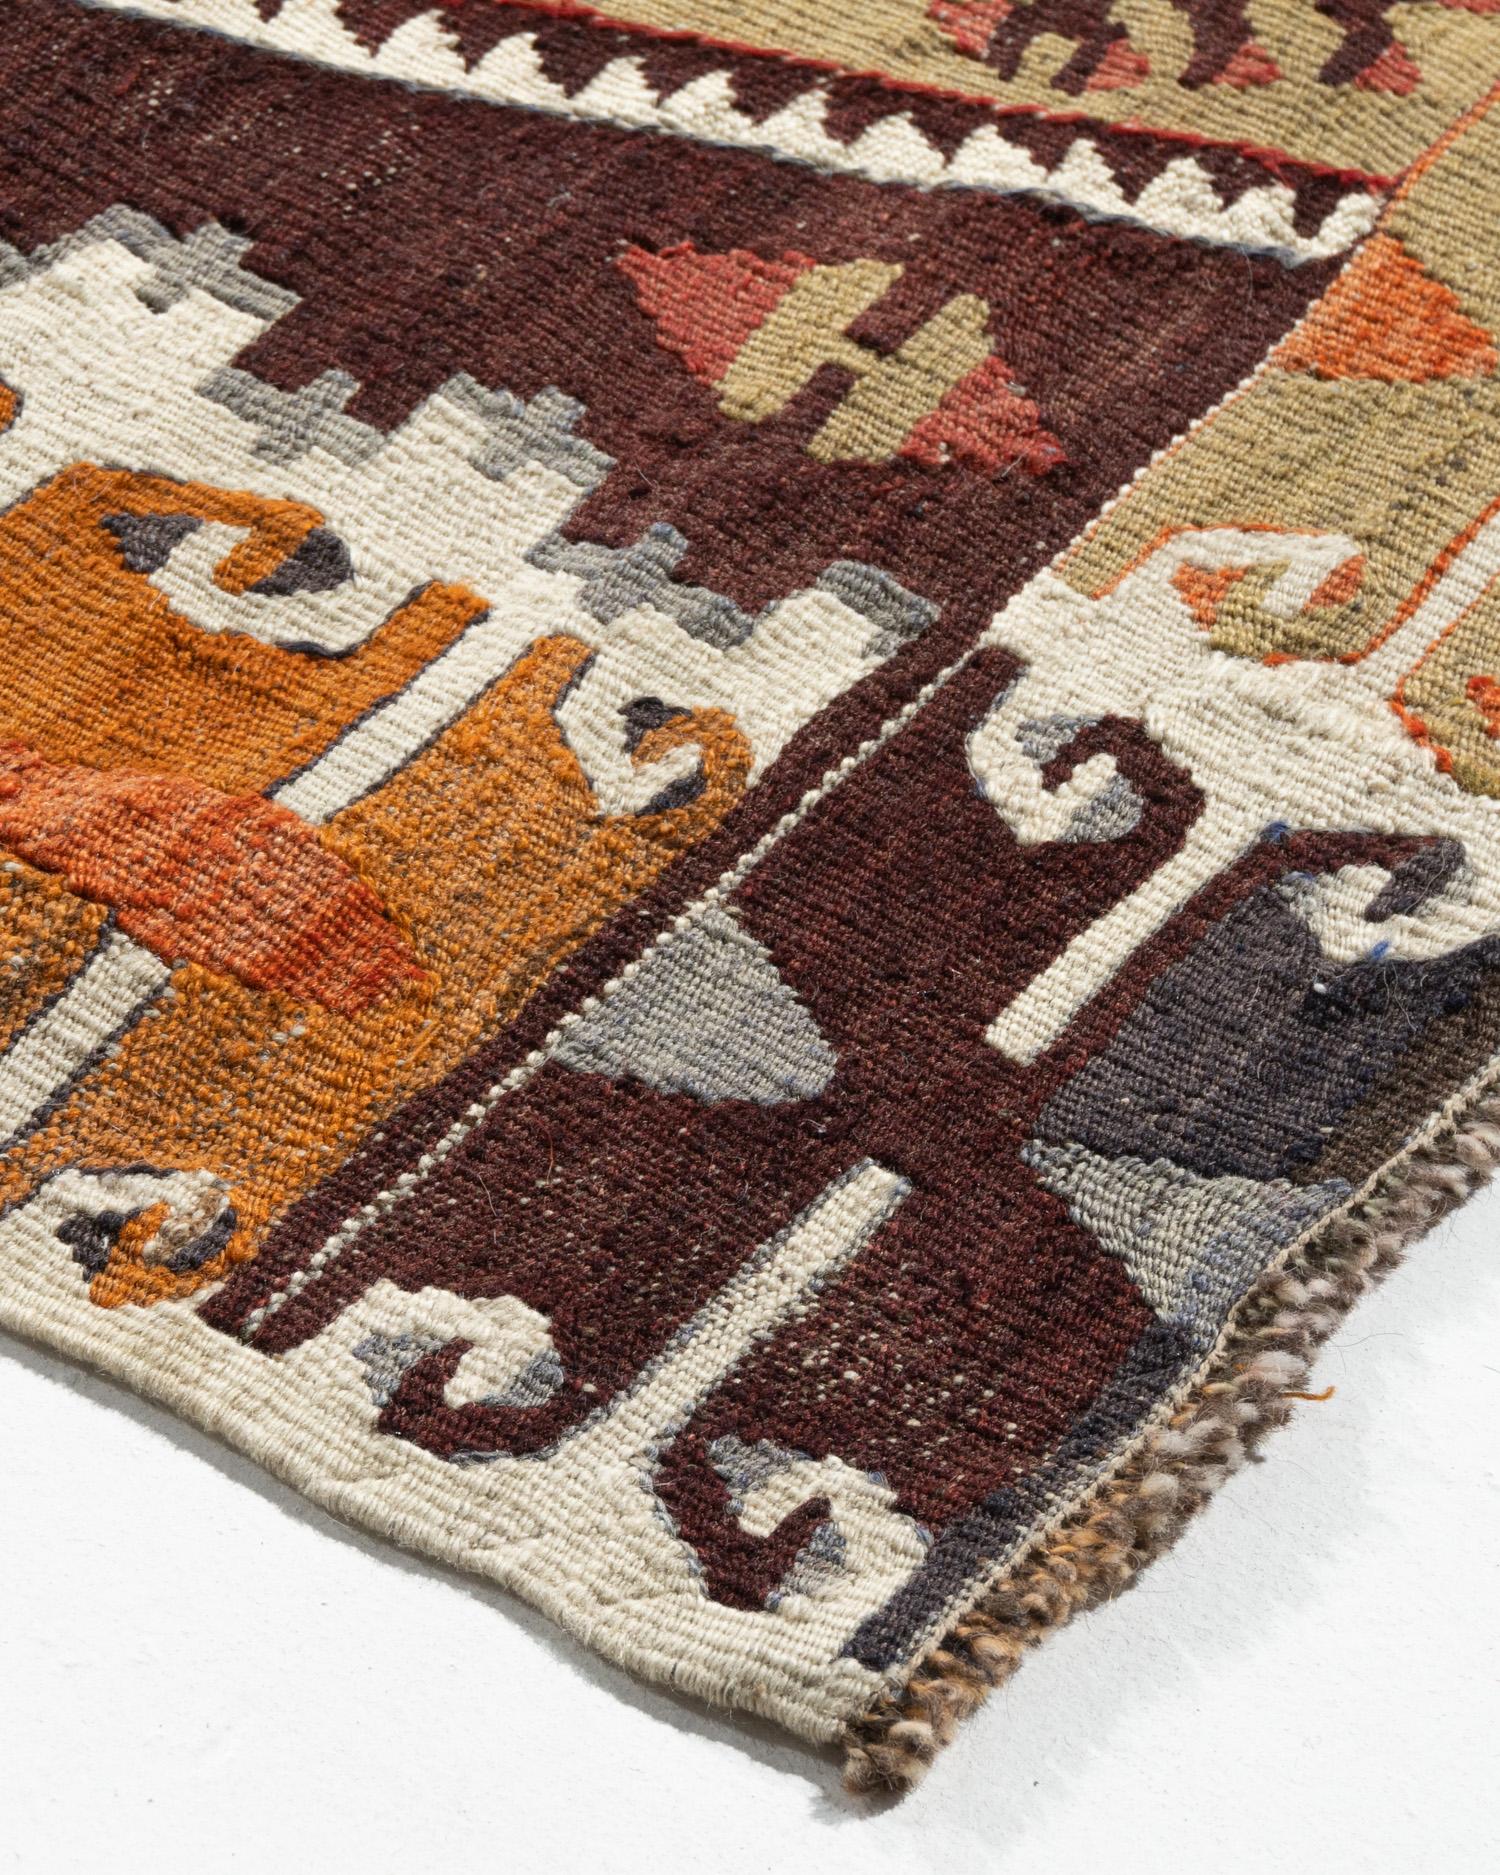 Vintage Turkish Kilim Rug 4'11 x 11'9 In Good Condition For Sale In New York, NY